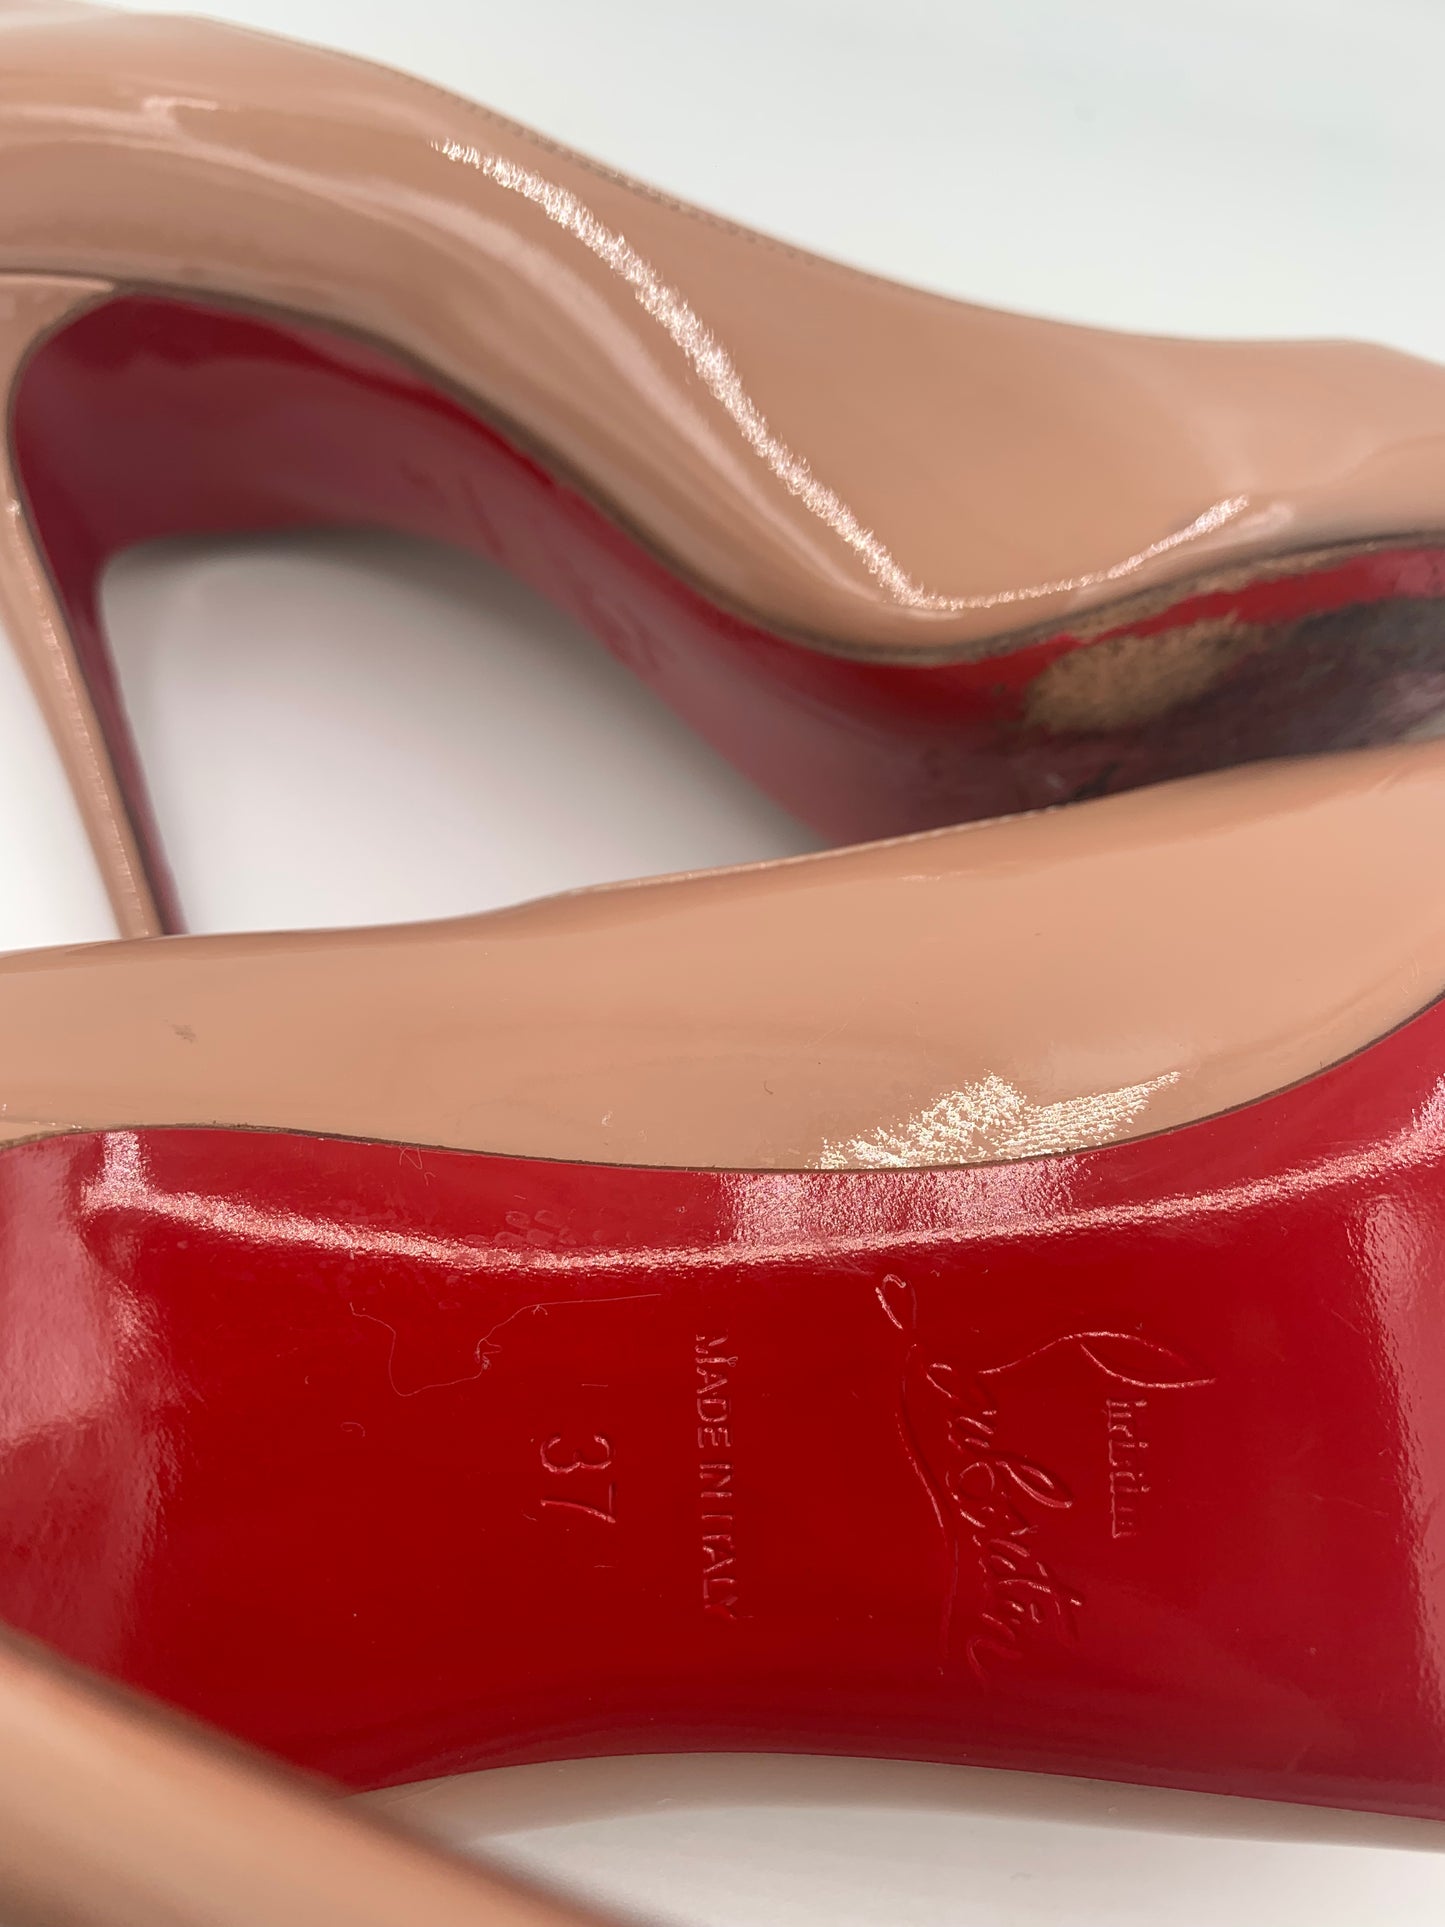 Christian Louboutin Nude Patent Leather Heels